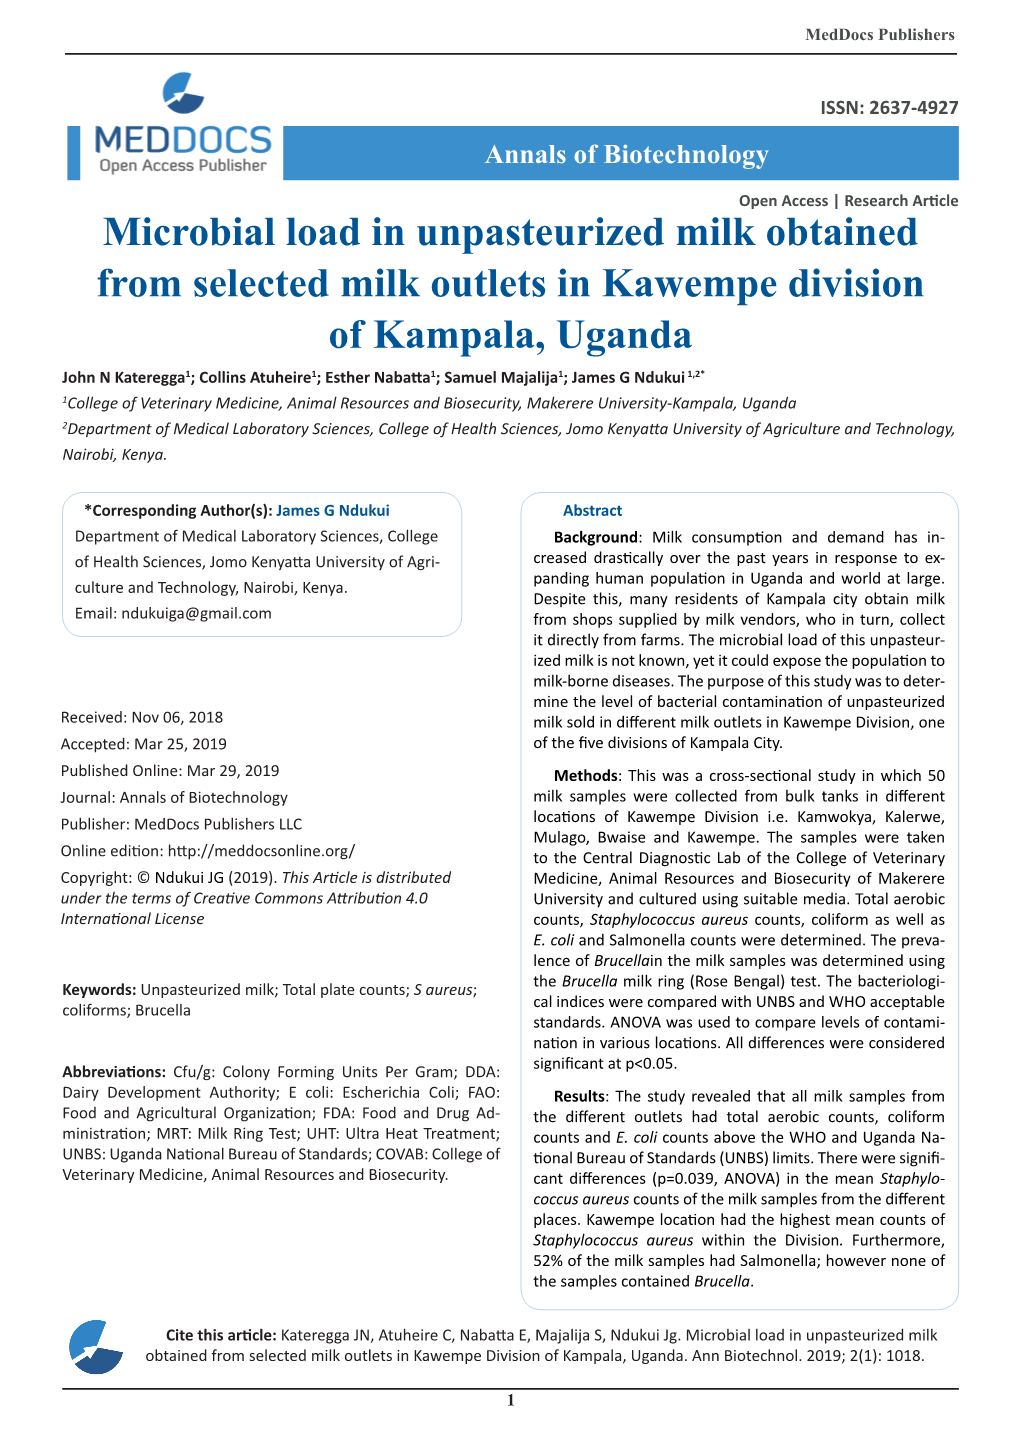 Microbial Load in Unpasteurized Milk Obtained from Selected Milk Outlets in Kawempe Division